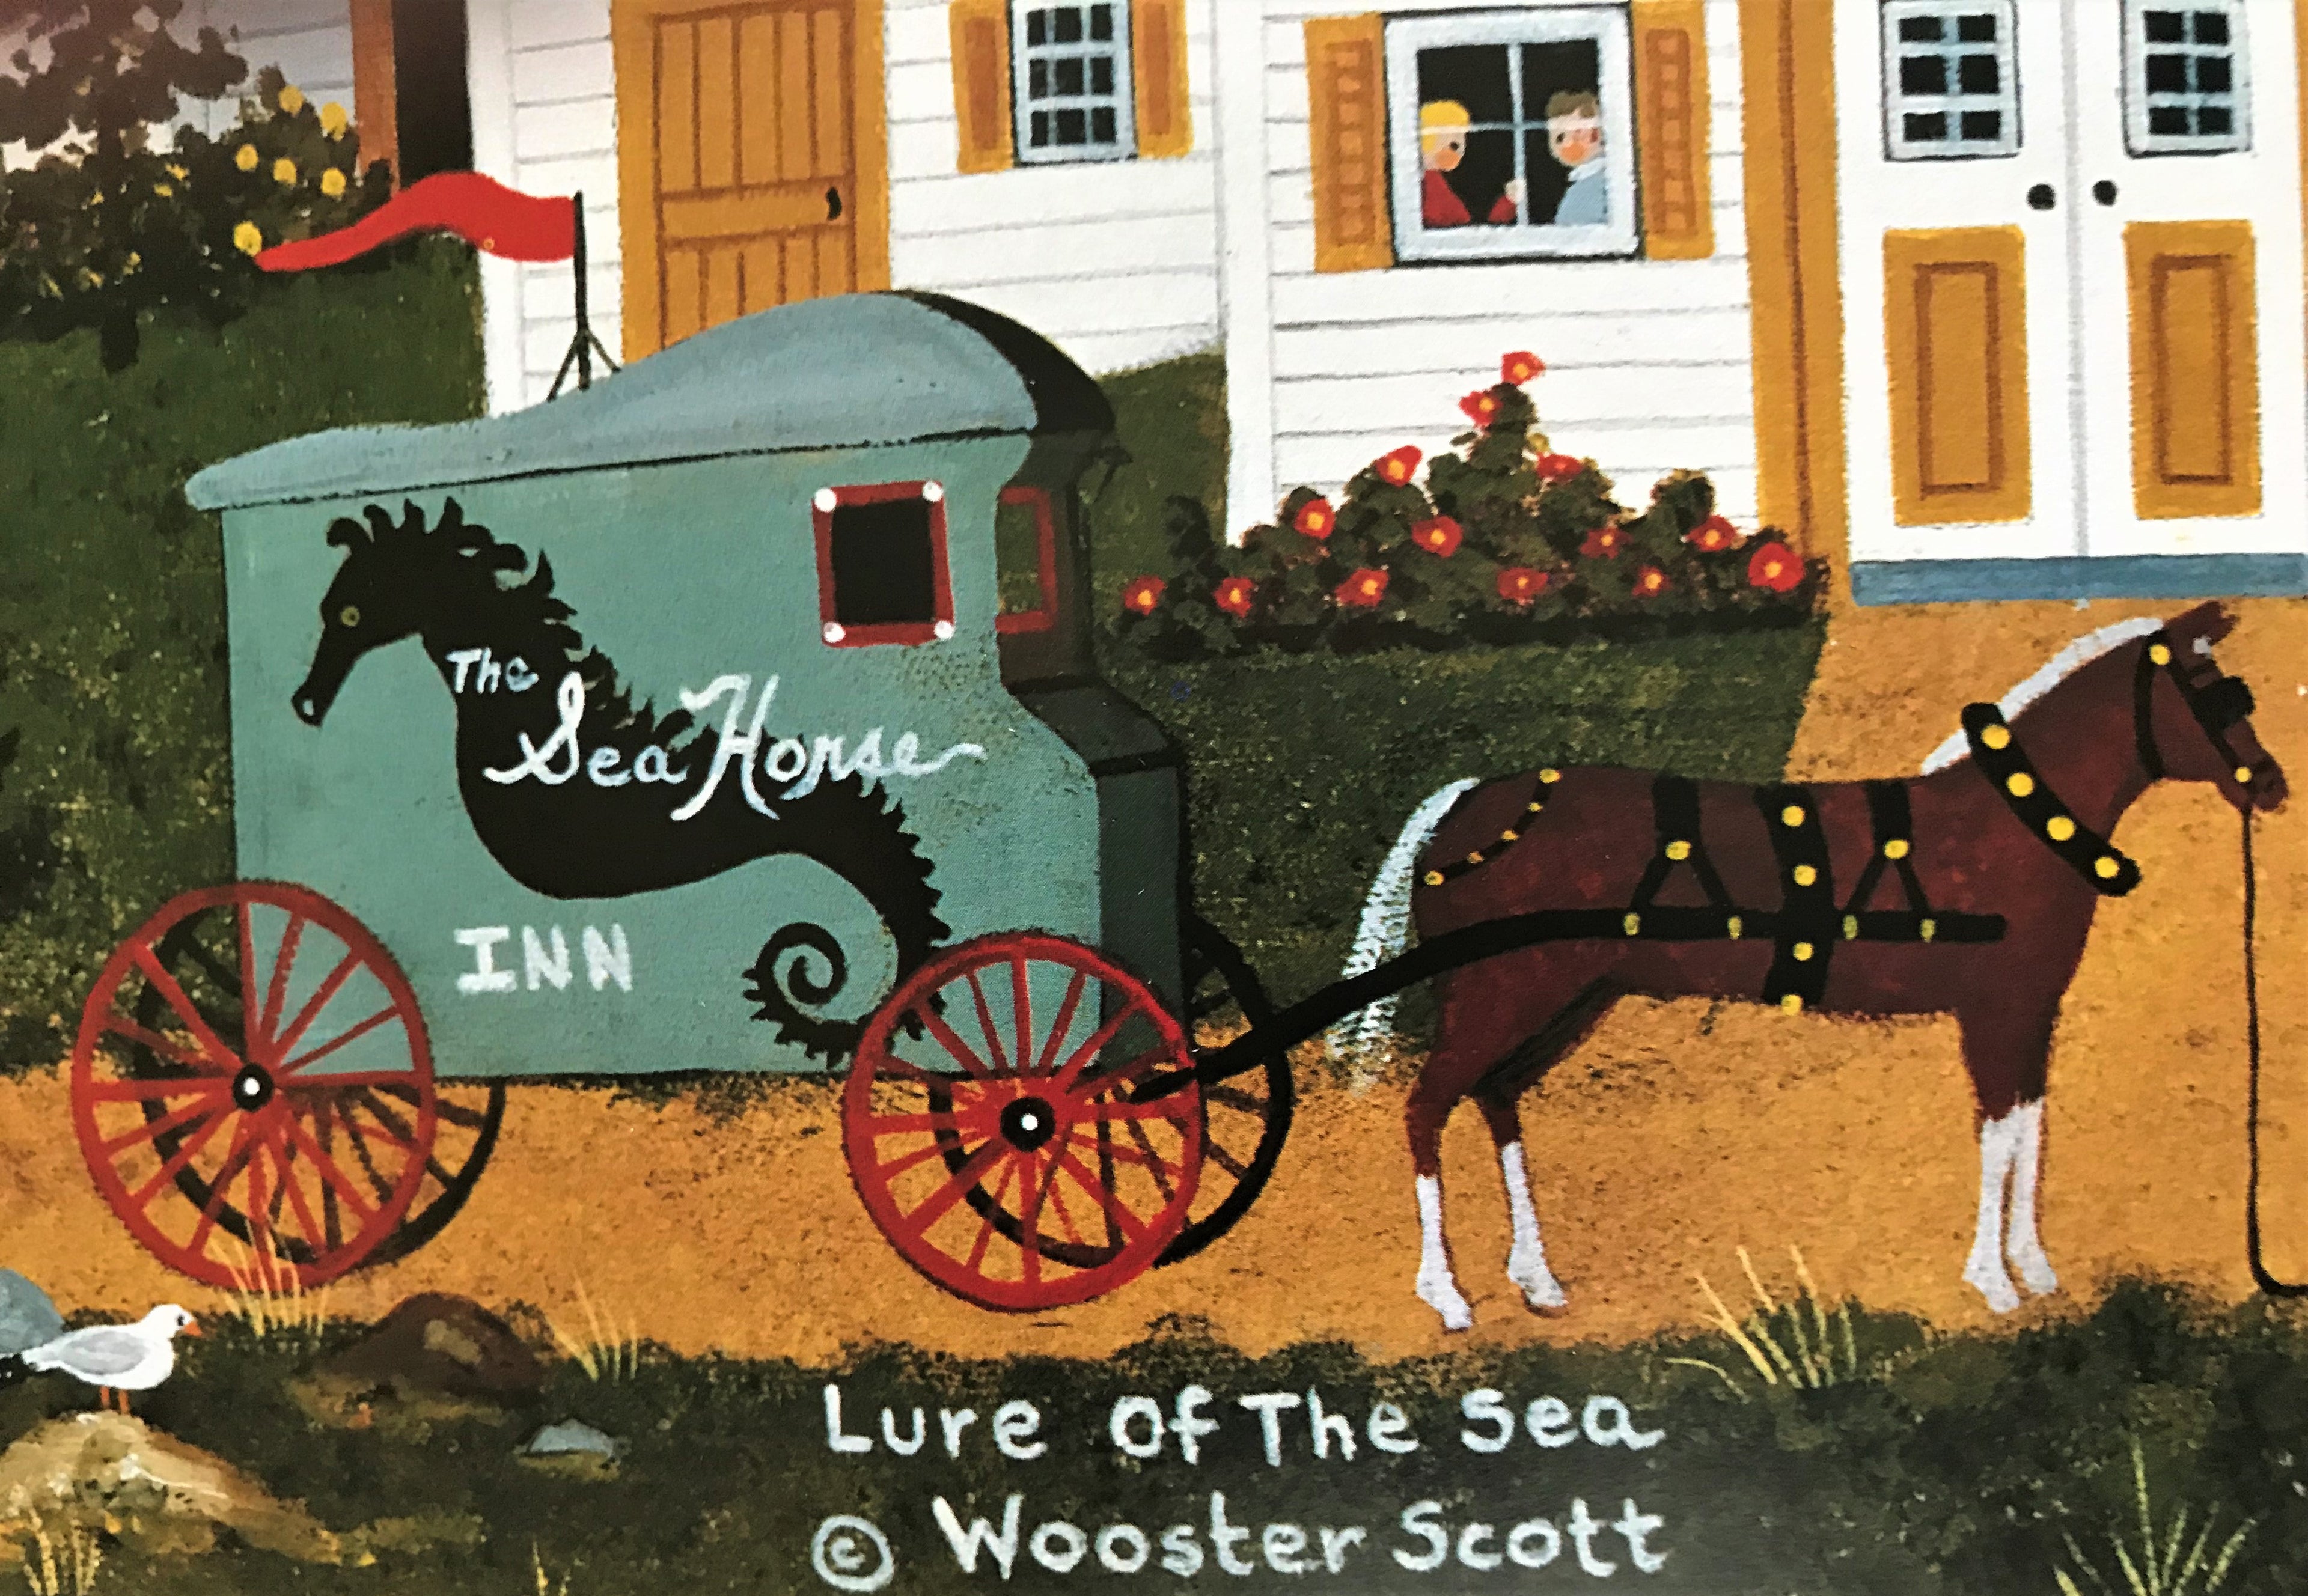 Lure of the Sea Jane Wooster Scott Artist Proof Lithograph Print Artist Hand Signed and AP Numbered